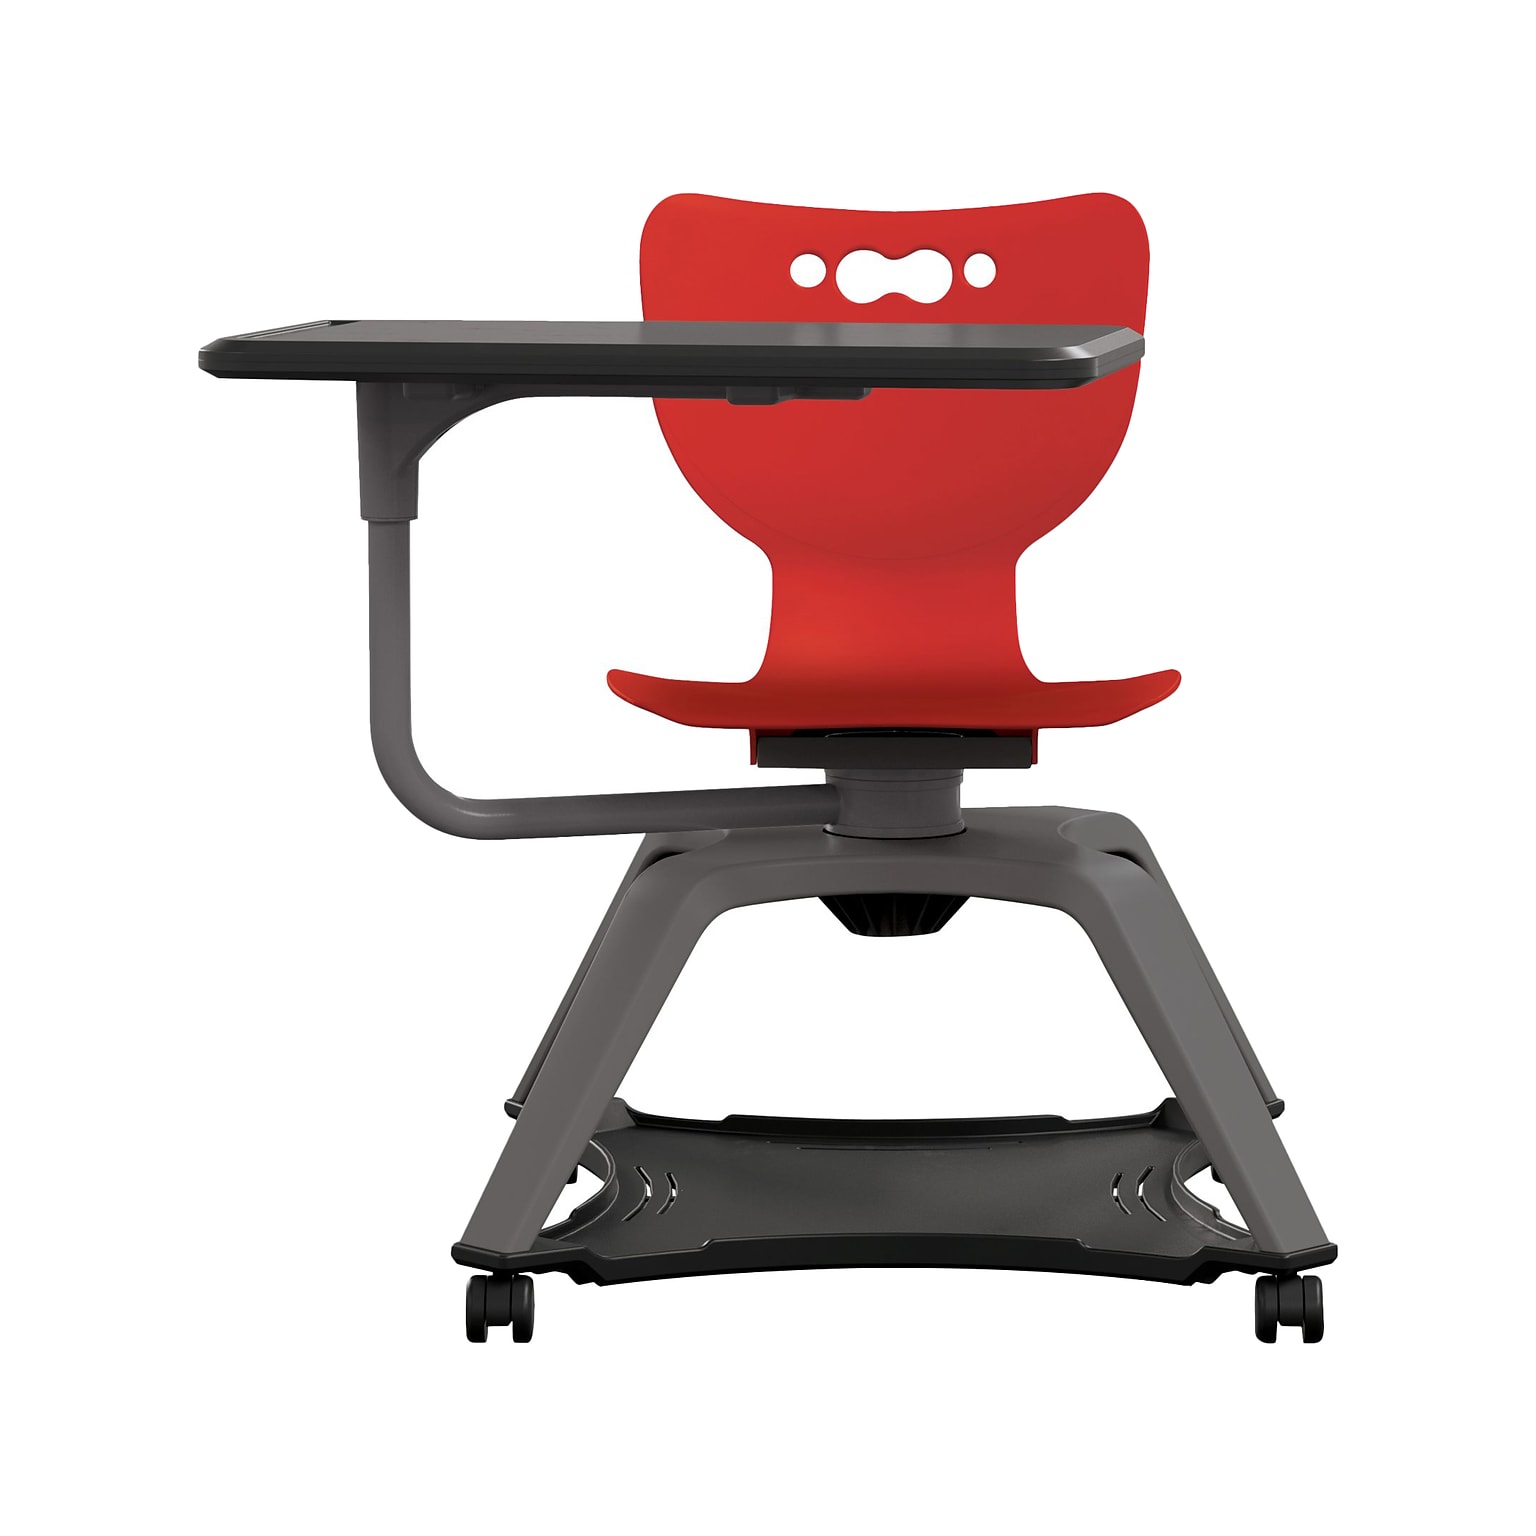 MooreCo Hierarchy Enroll Polypropylene School Chair, Red (54325-Red-NA-TN-SC)